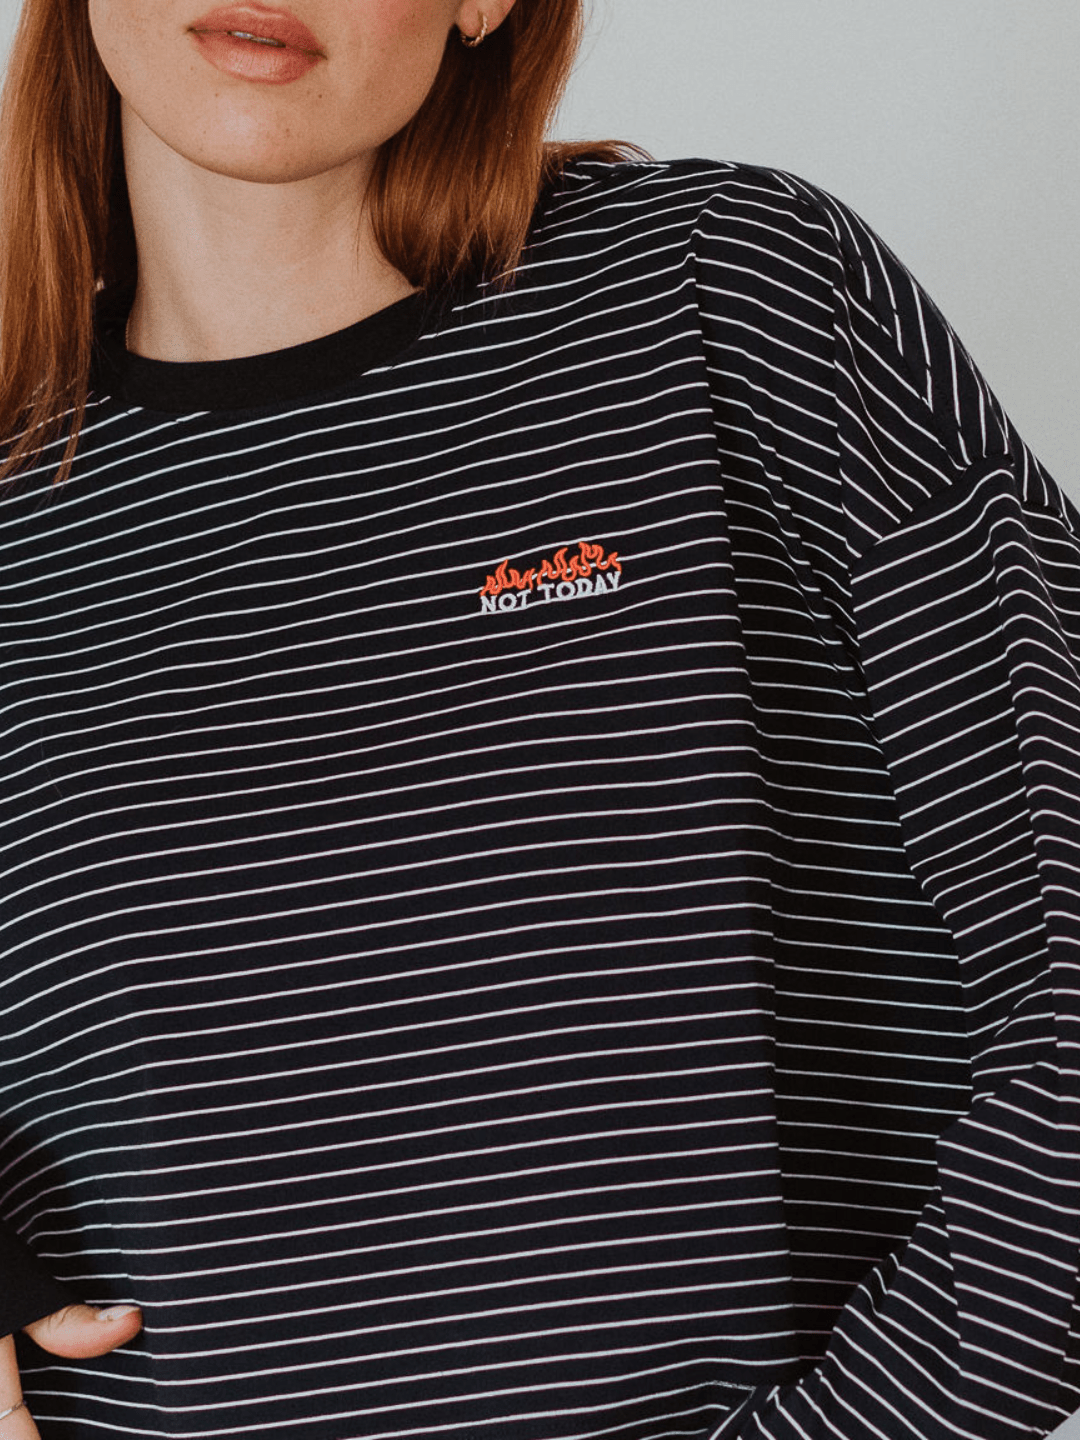 Not Today Striped Long Sleeve - Octopied Mind